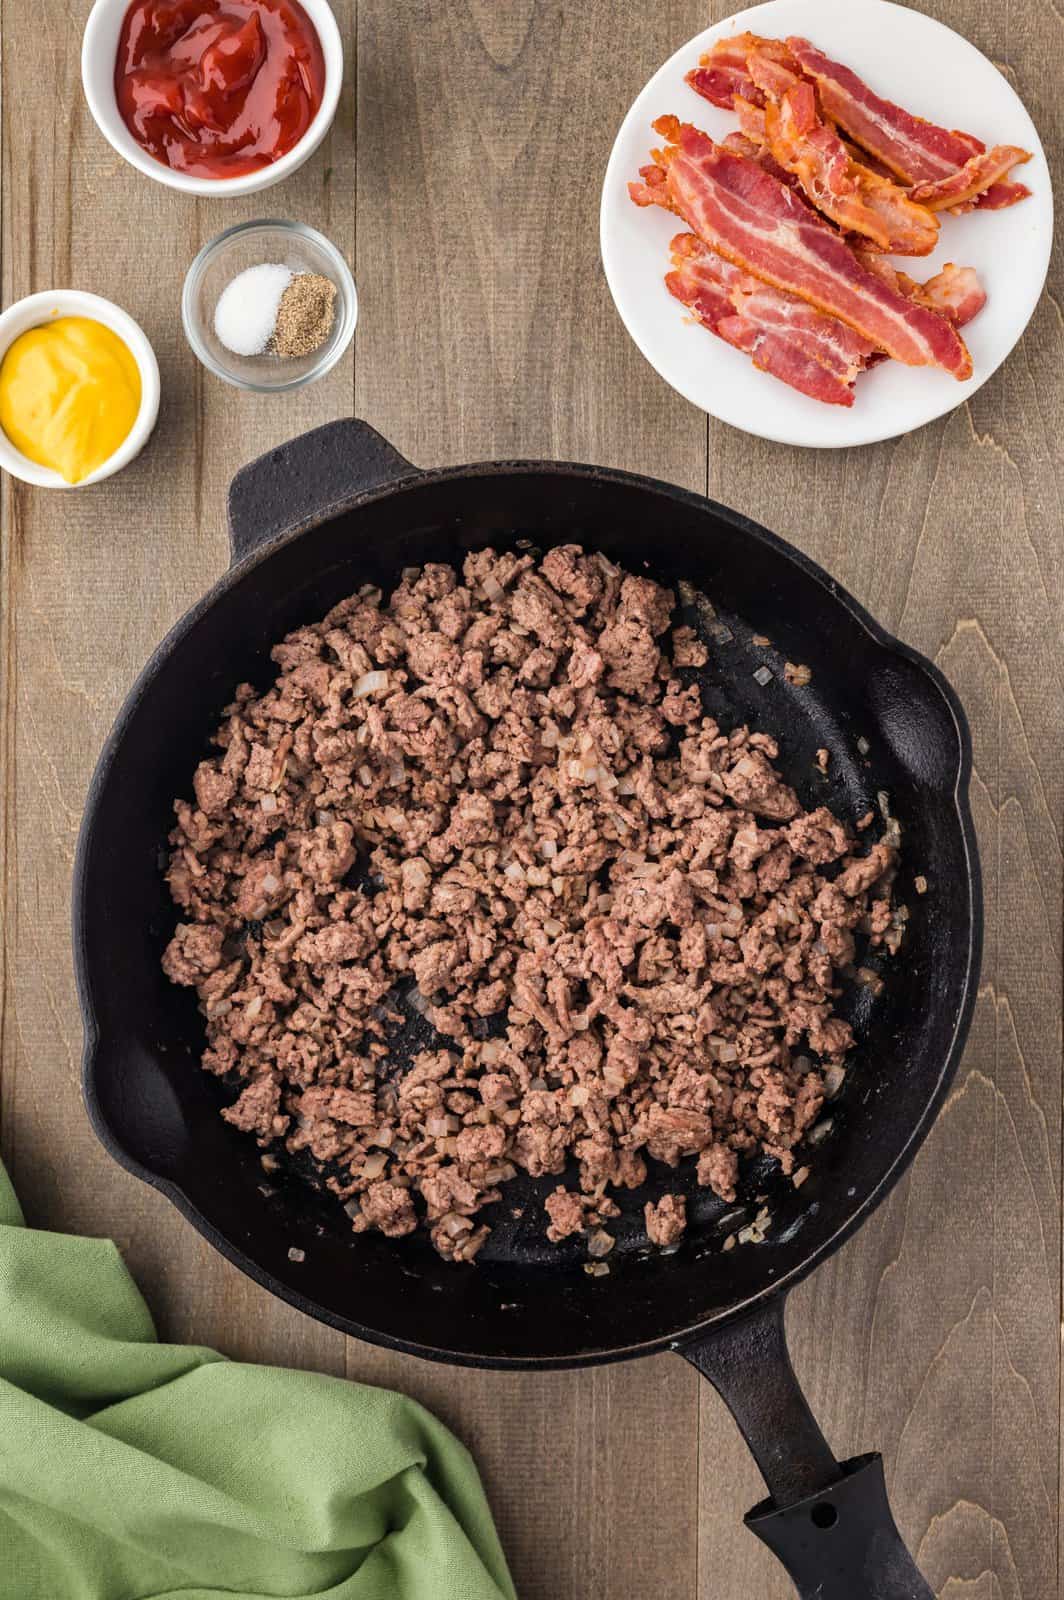 A skillet with ground beef.